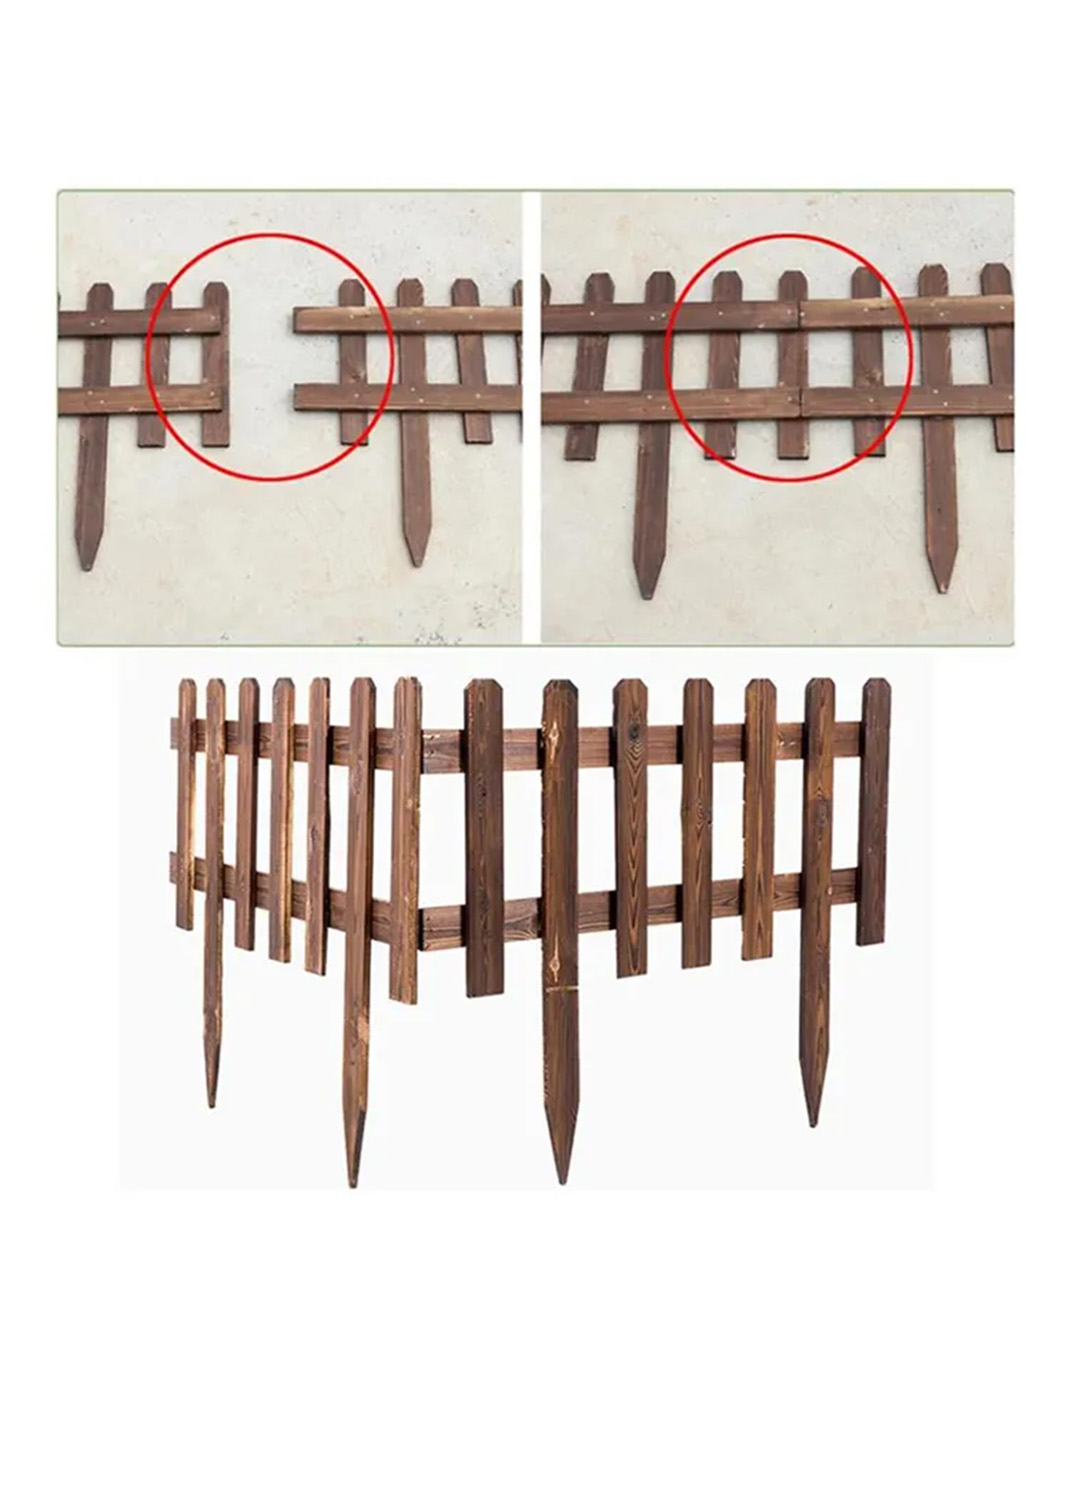 Vintage Wood Rustic Home Garden Supplies Wooden Grating Picket Fence